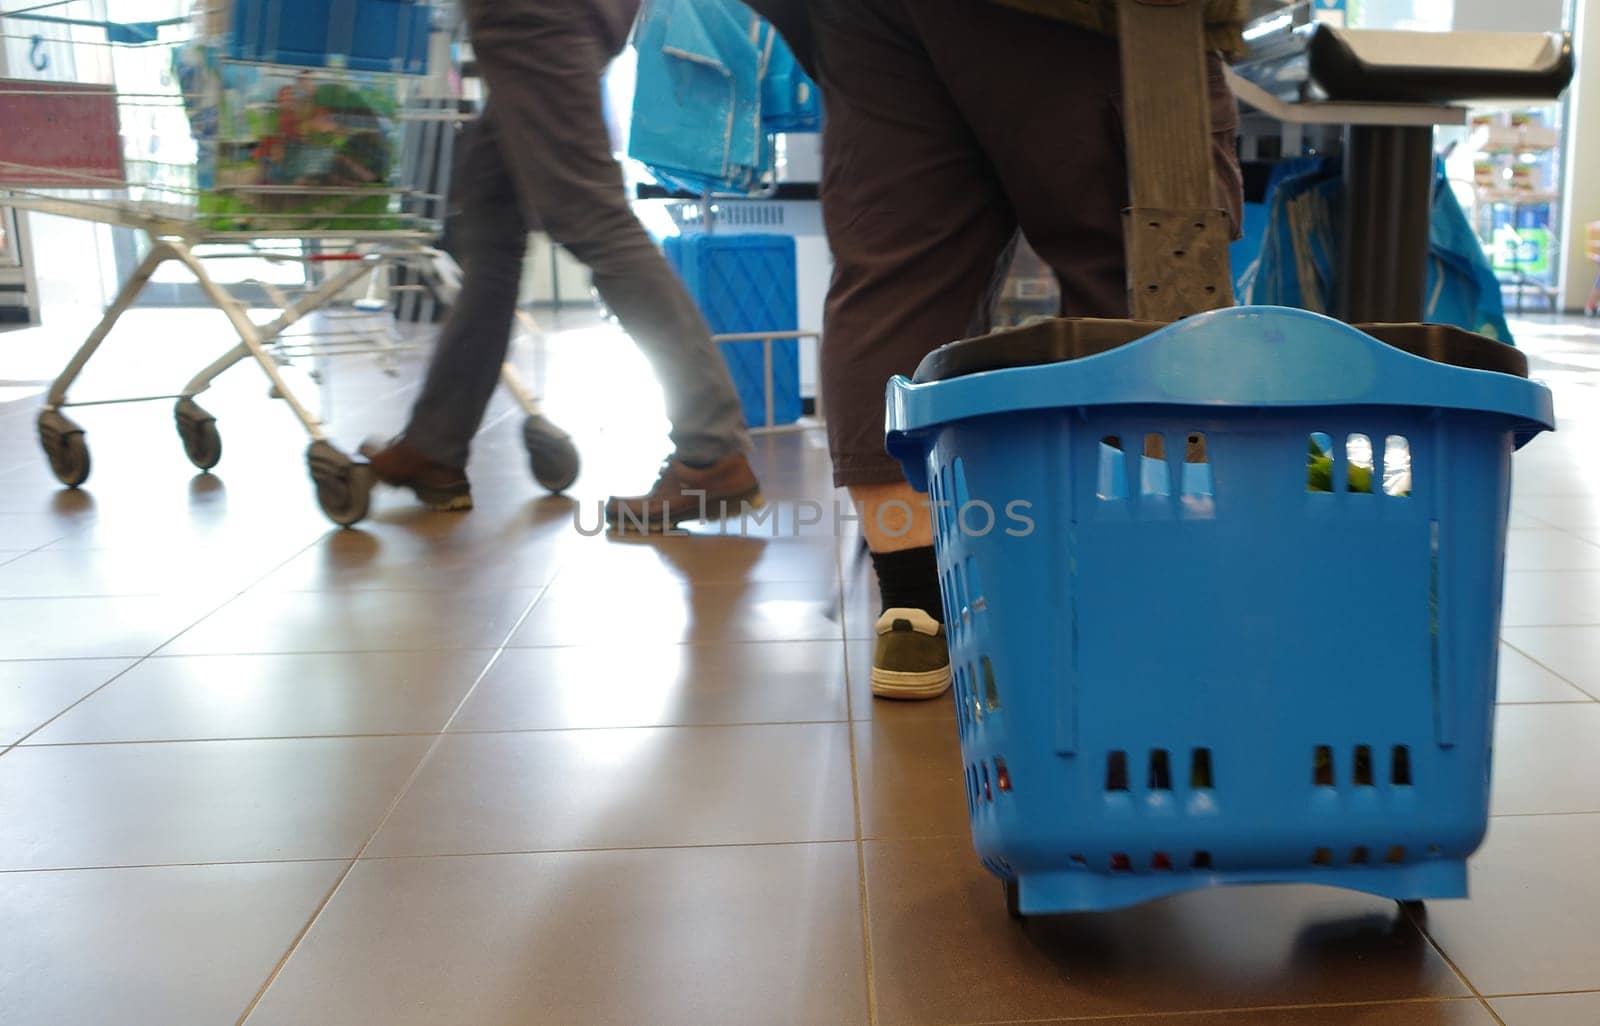 The legs of a man who is shopping. He pulls a blue plastic shopping basket on rollers behind him. In the background are the legs of a person with a shopping cart visible